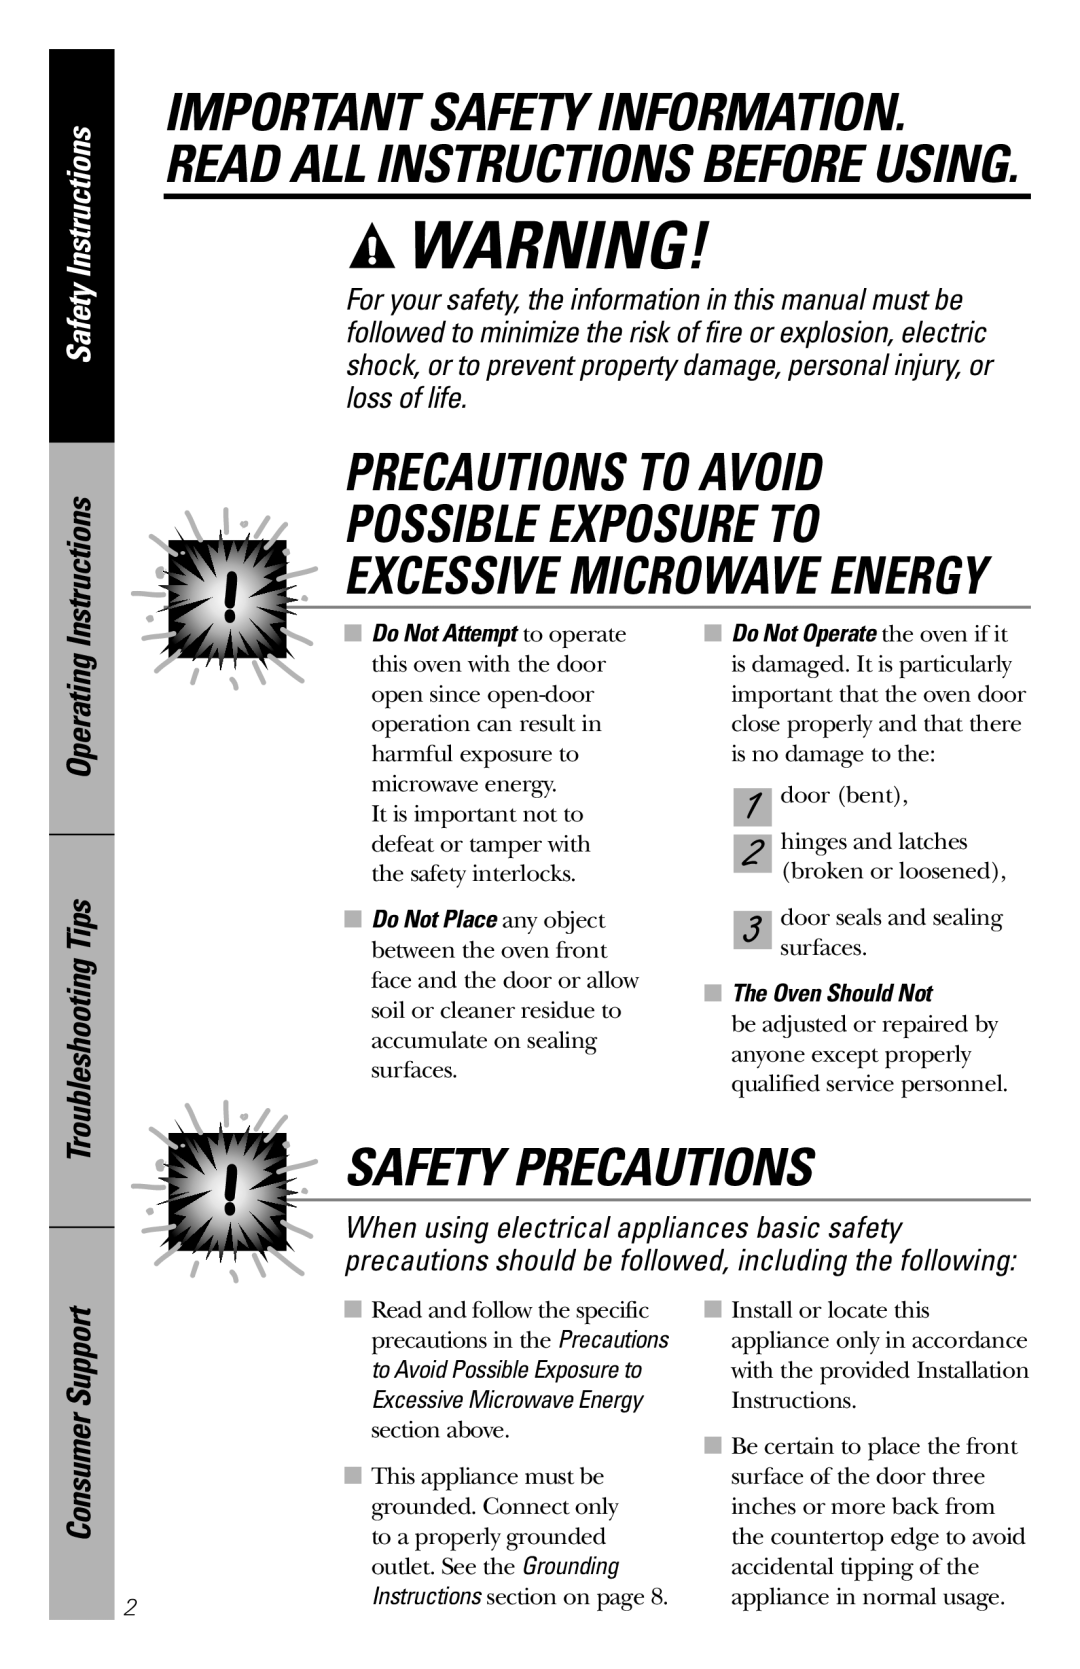 GE REM25 Precautions To Avoid, Safety Precautions, Important Safety Information. Read All Instructions Before Using 